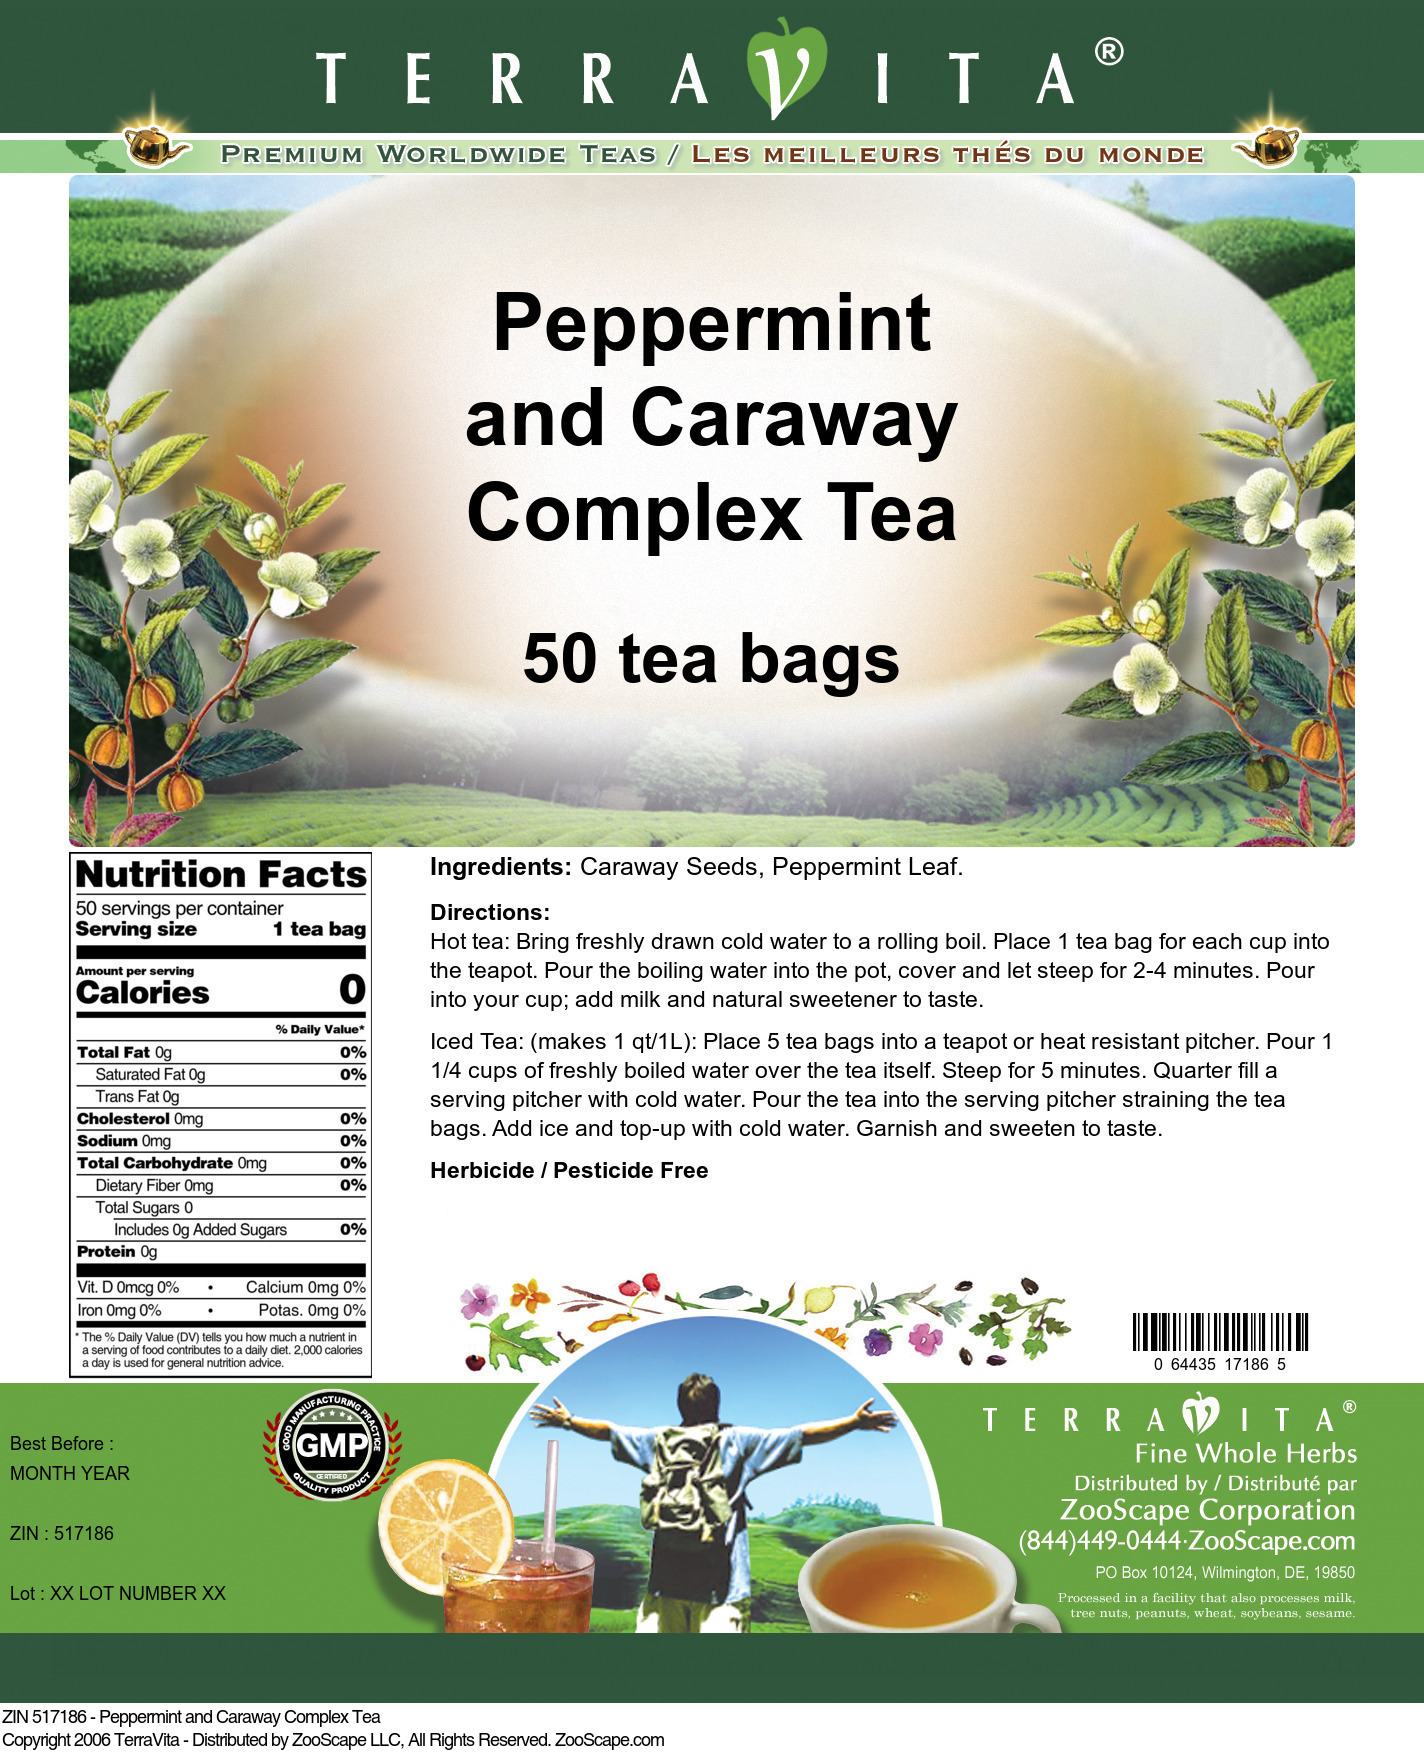 Peppermint and Caraway Complex Tea - Label